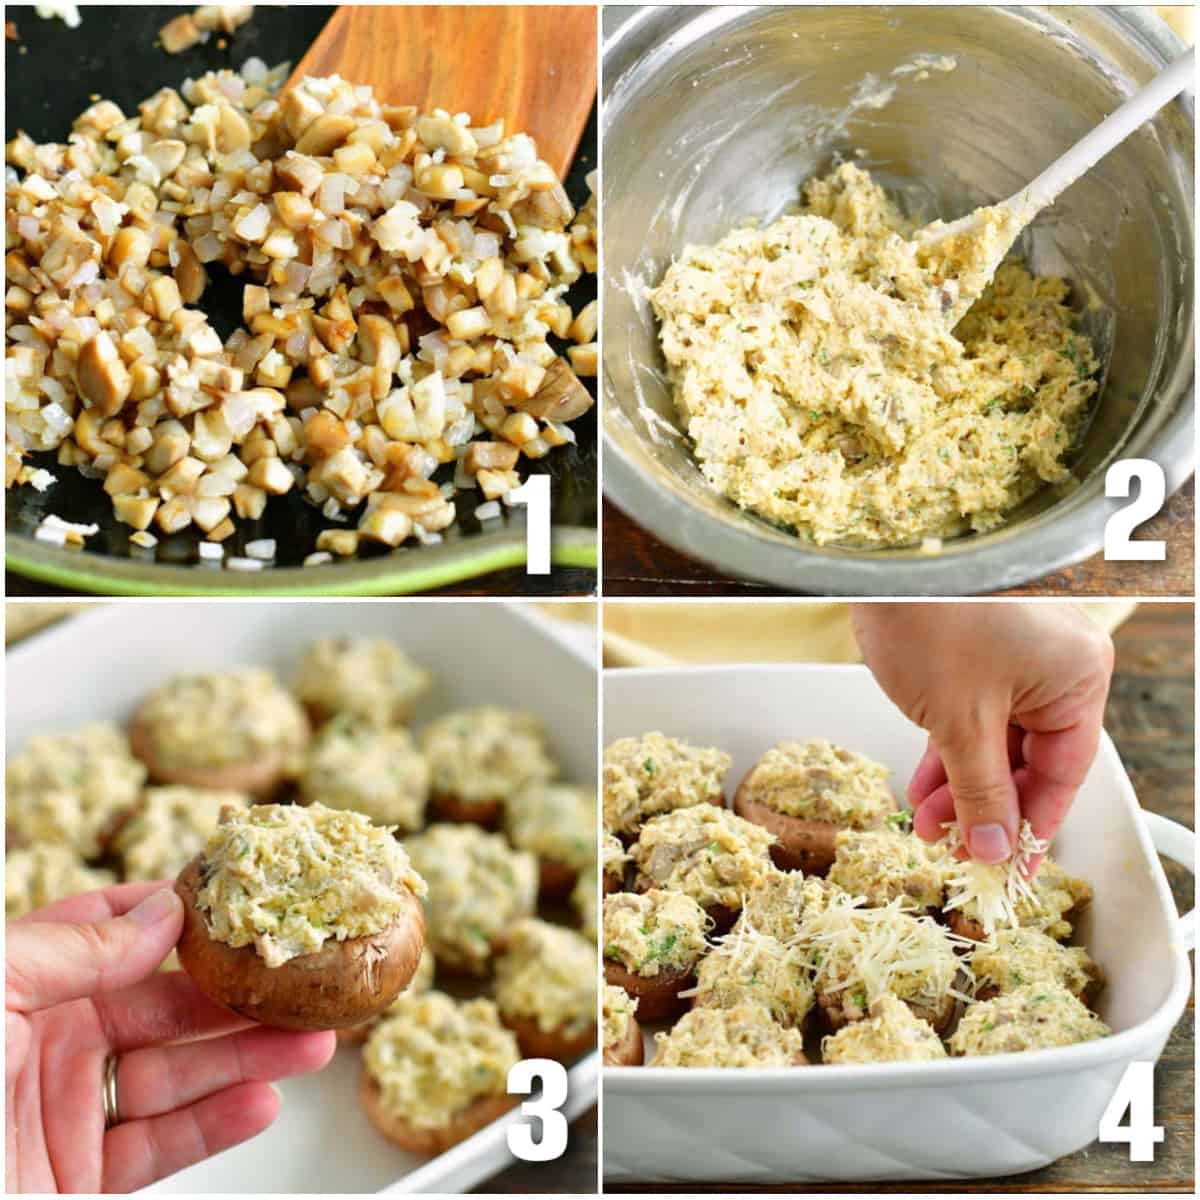 four image collage of steps to make stuffed mushrooms with cooking veggies, mixing and stuffing.